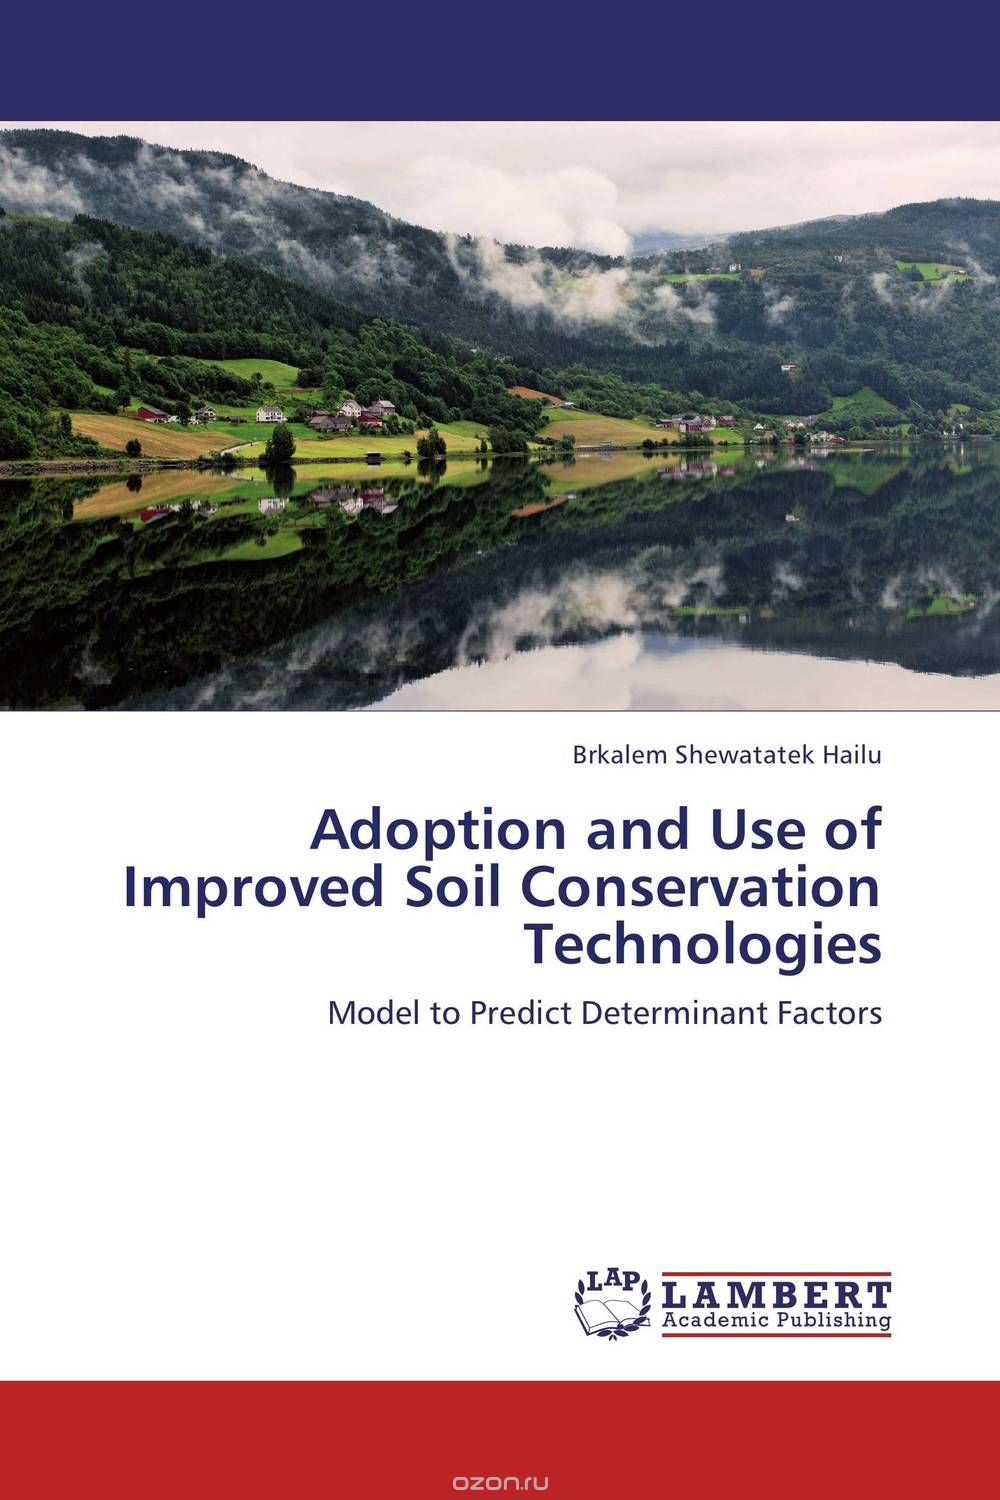 Adoption and Use of Improved Soil Conservation Technologies